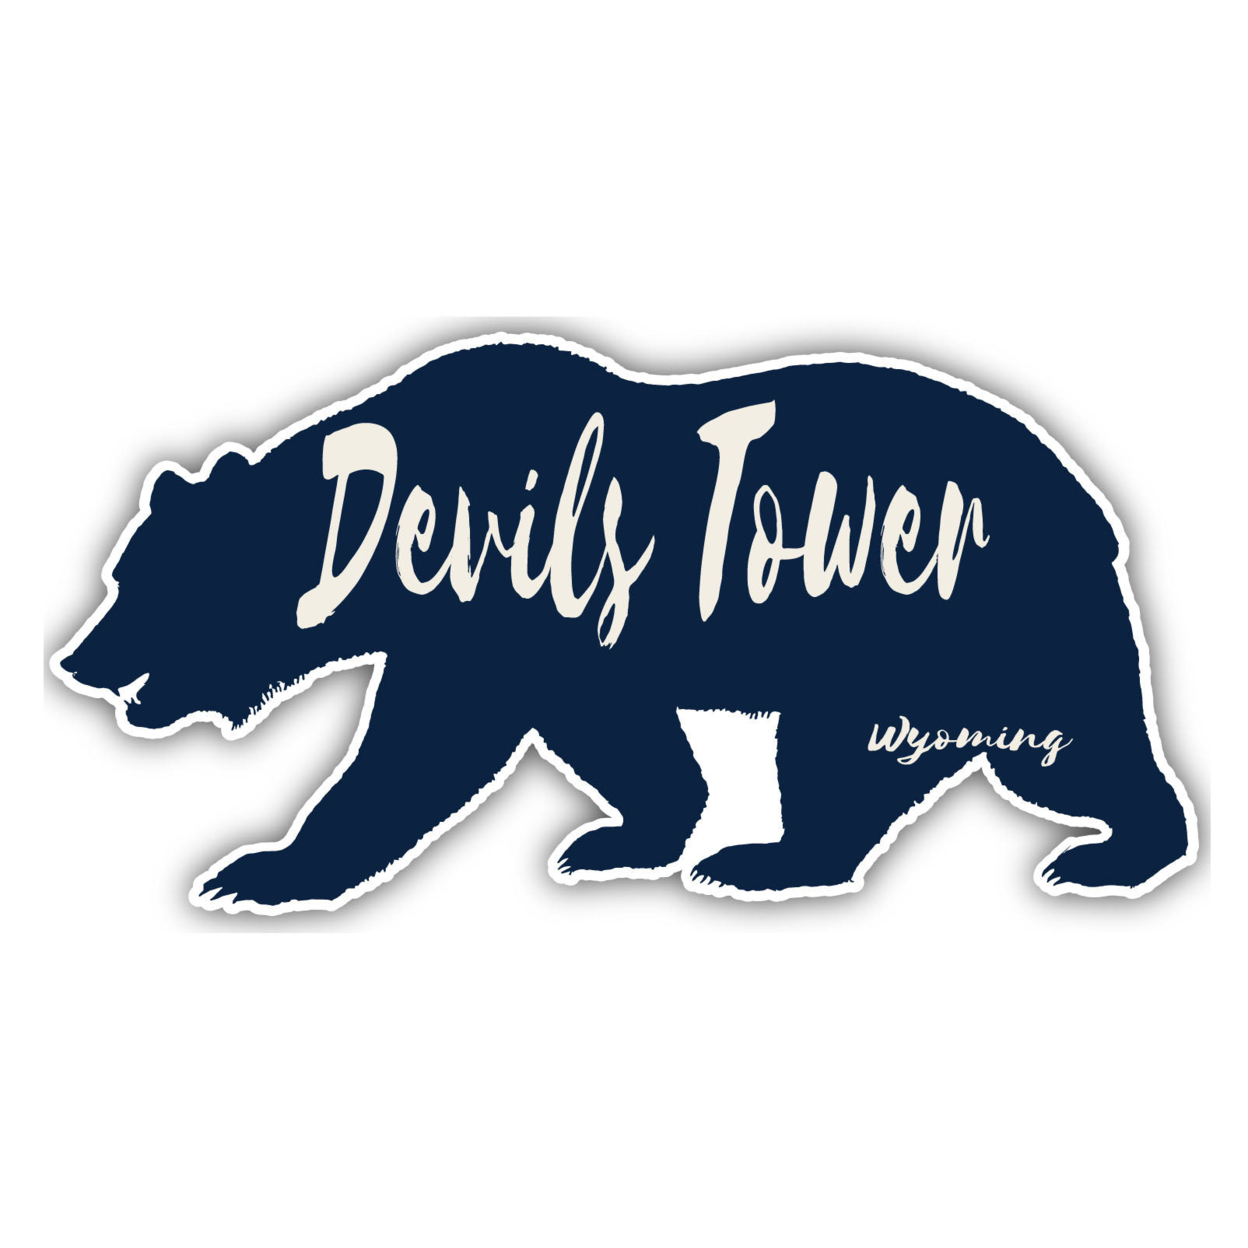 Devils Tower Wyoming Souvenir Decorative Stickers (Choose Theme And Size) - Single Unit, 4-Inch, Adventures Awaits